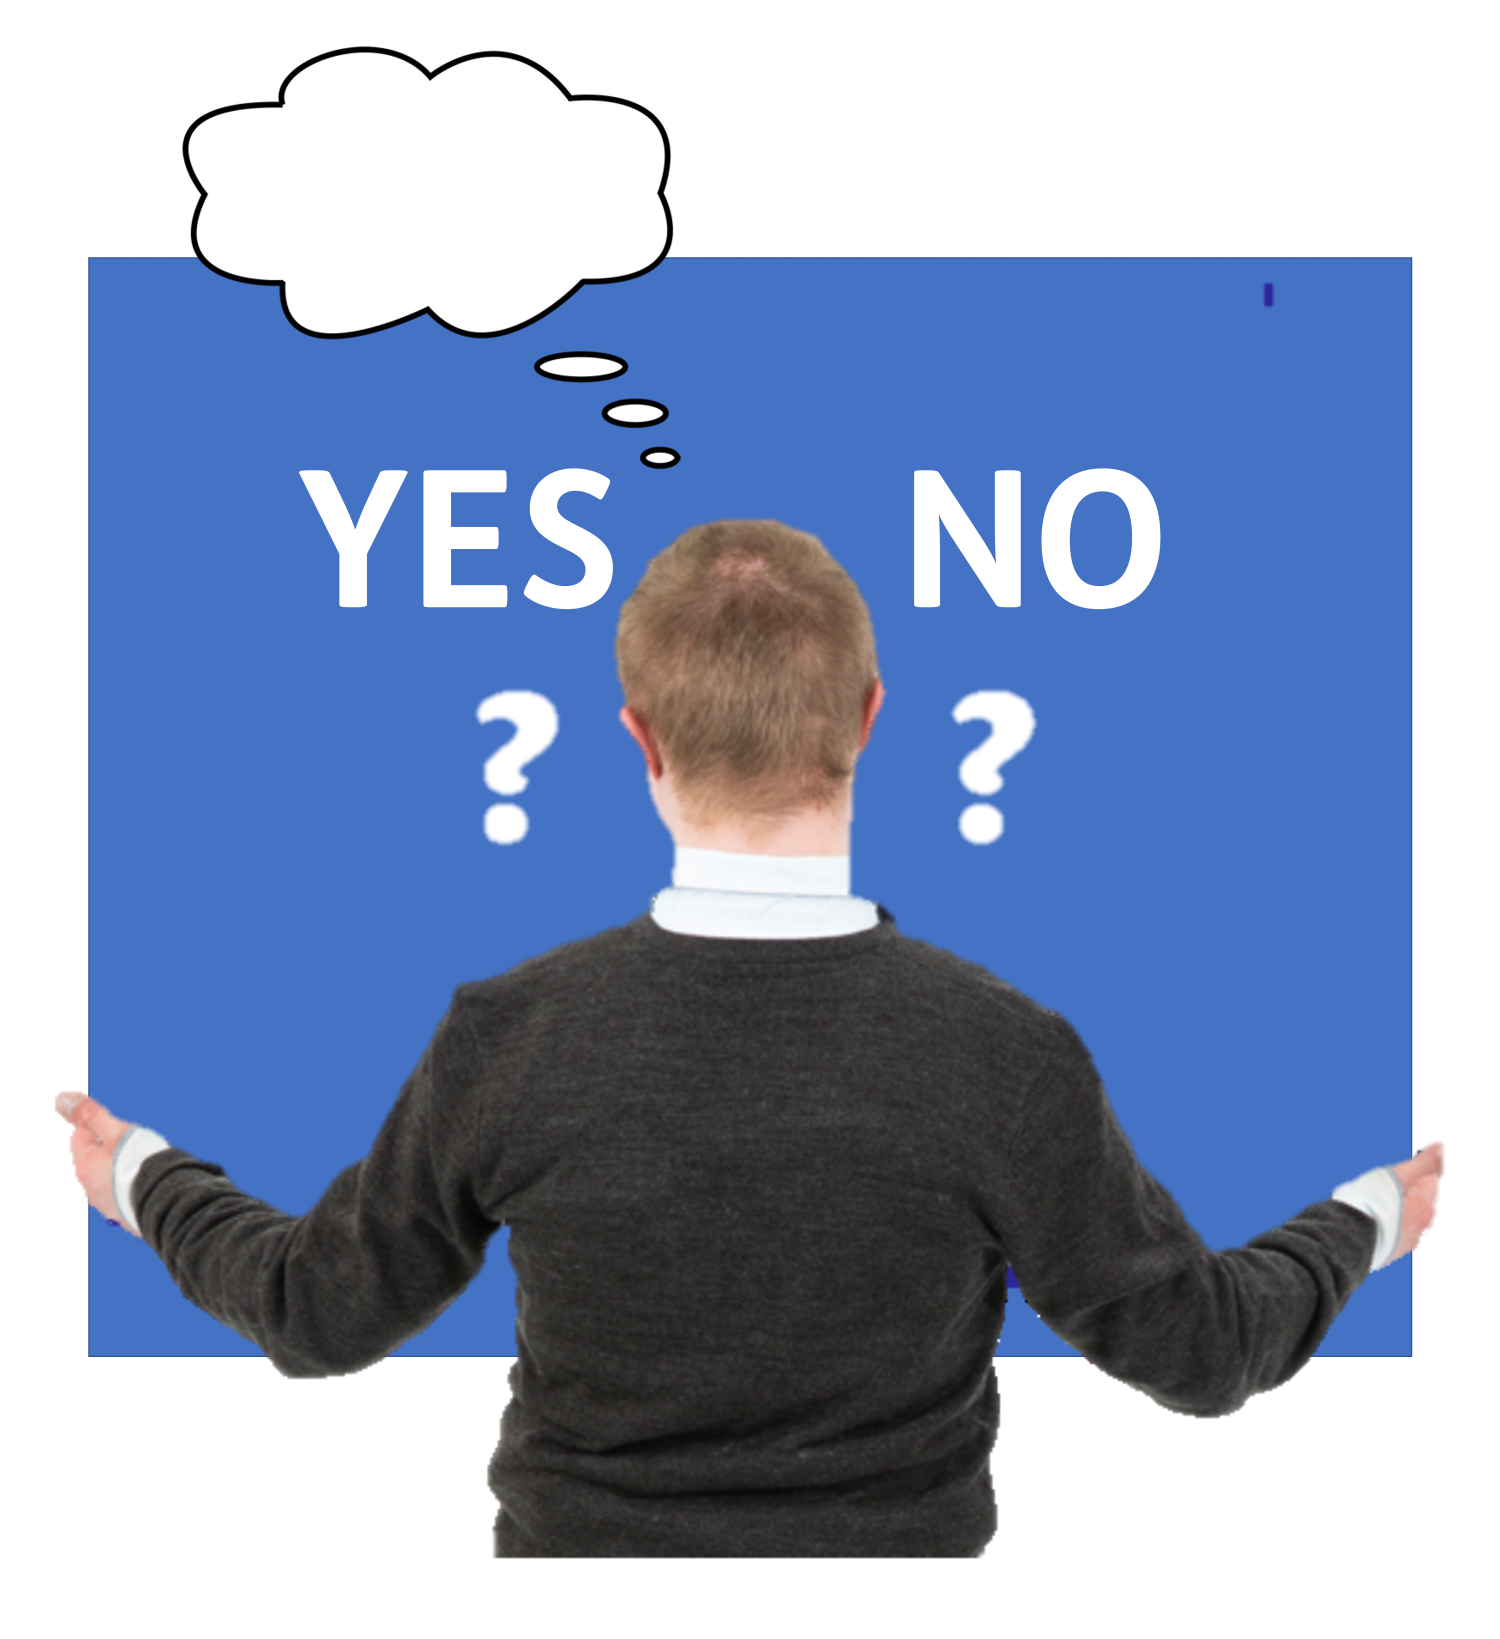 A man is holding up a board and looking at it thinking. On the board are the words Yes and No with question marks underneath them